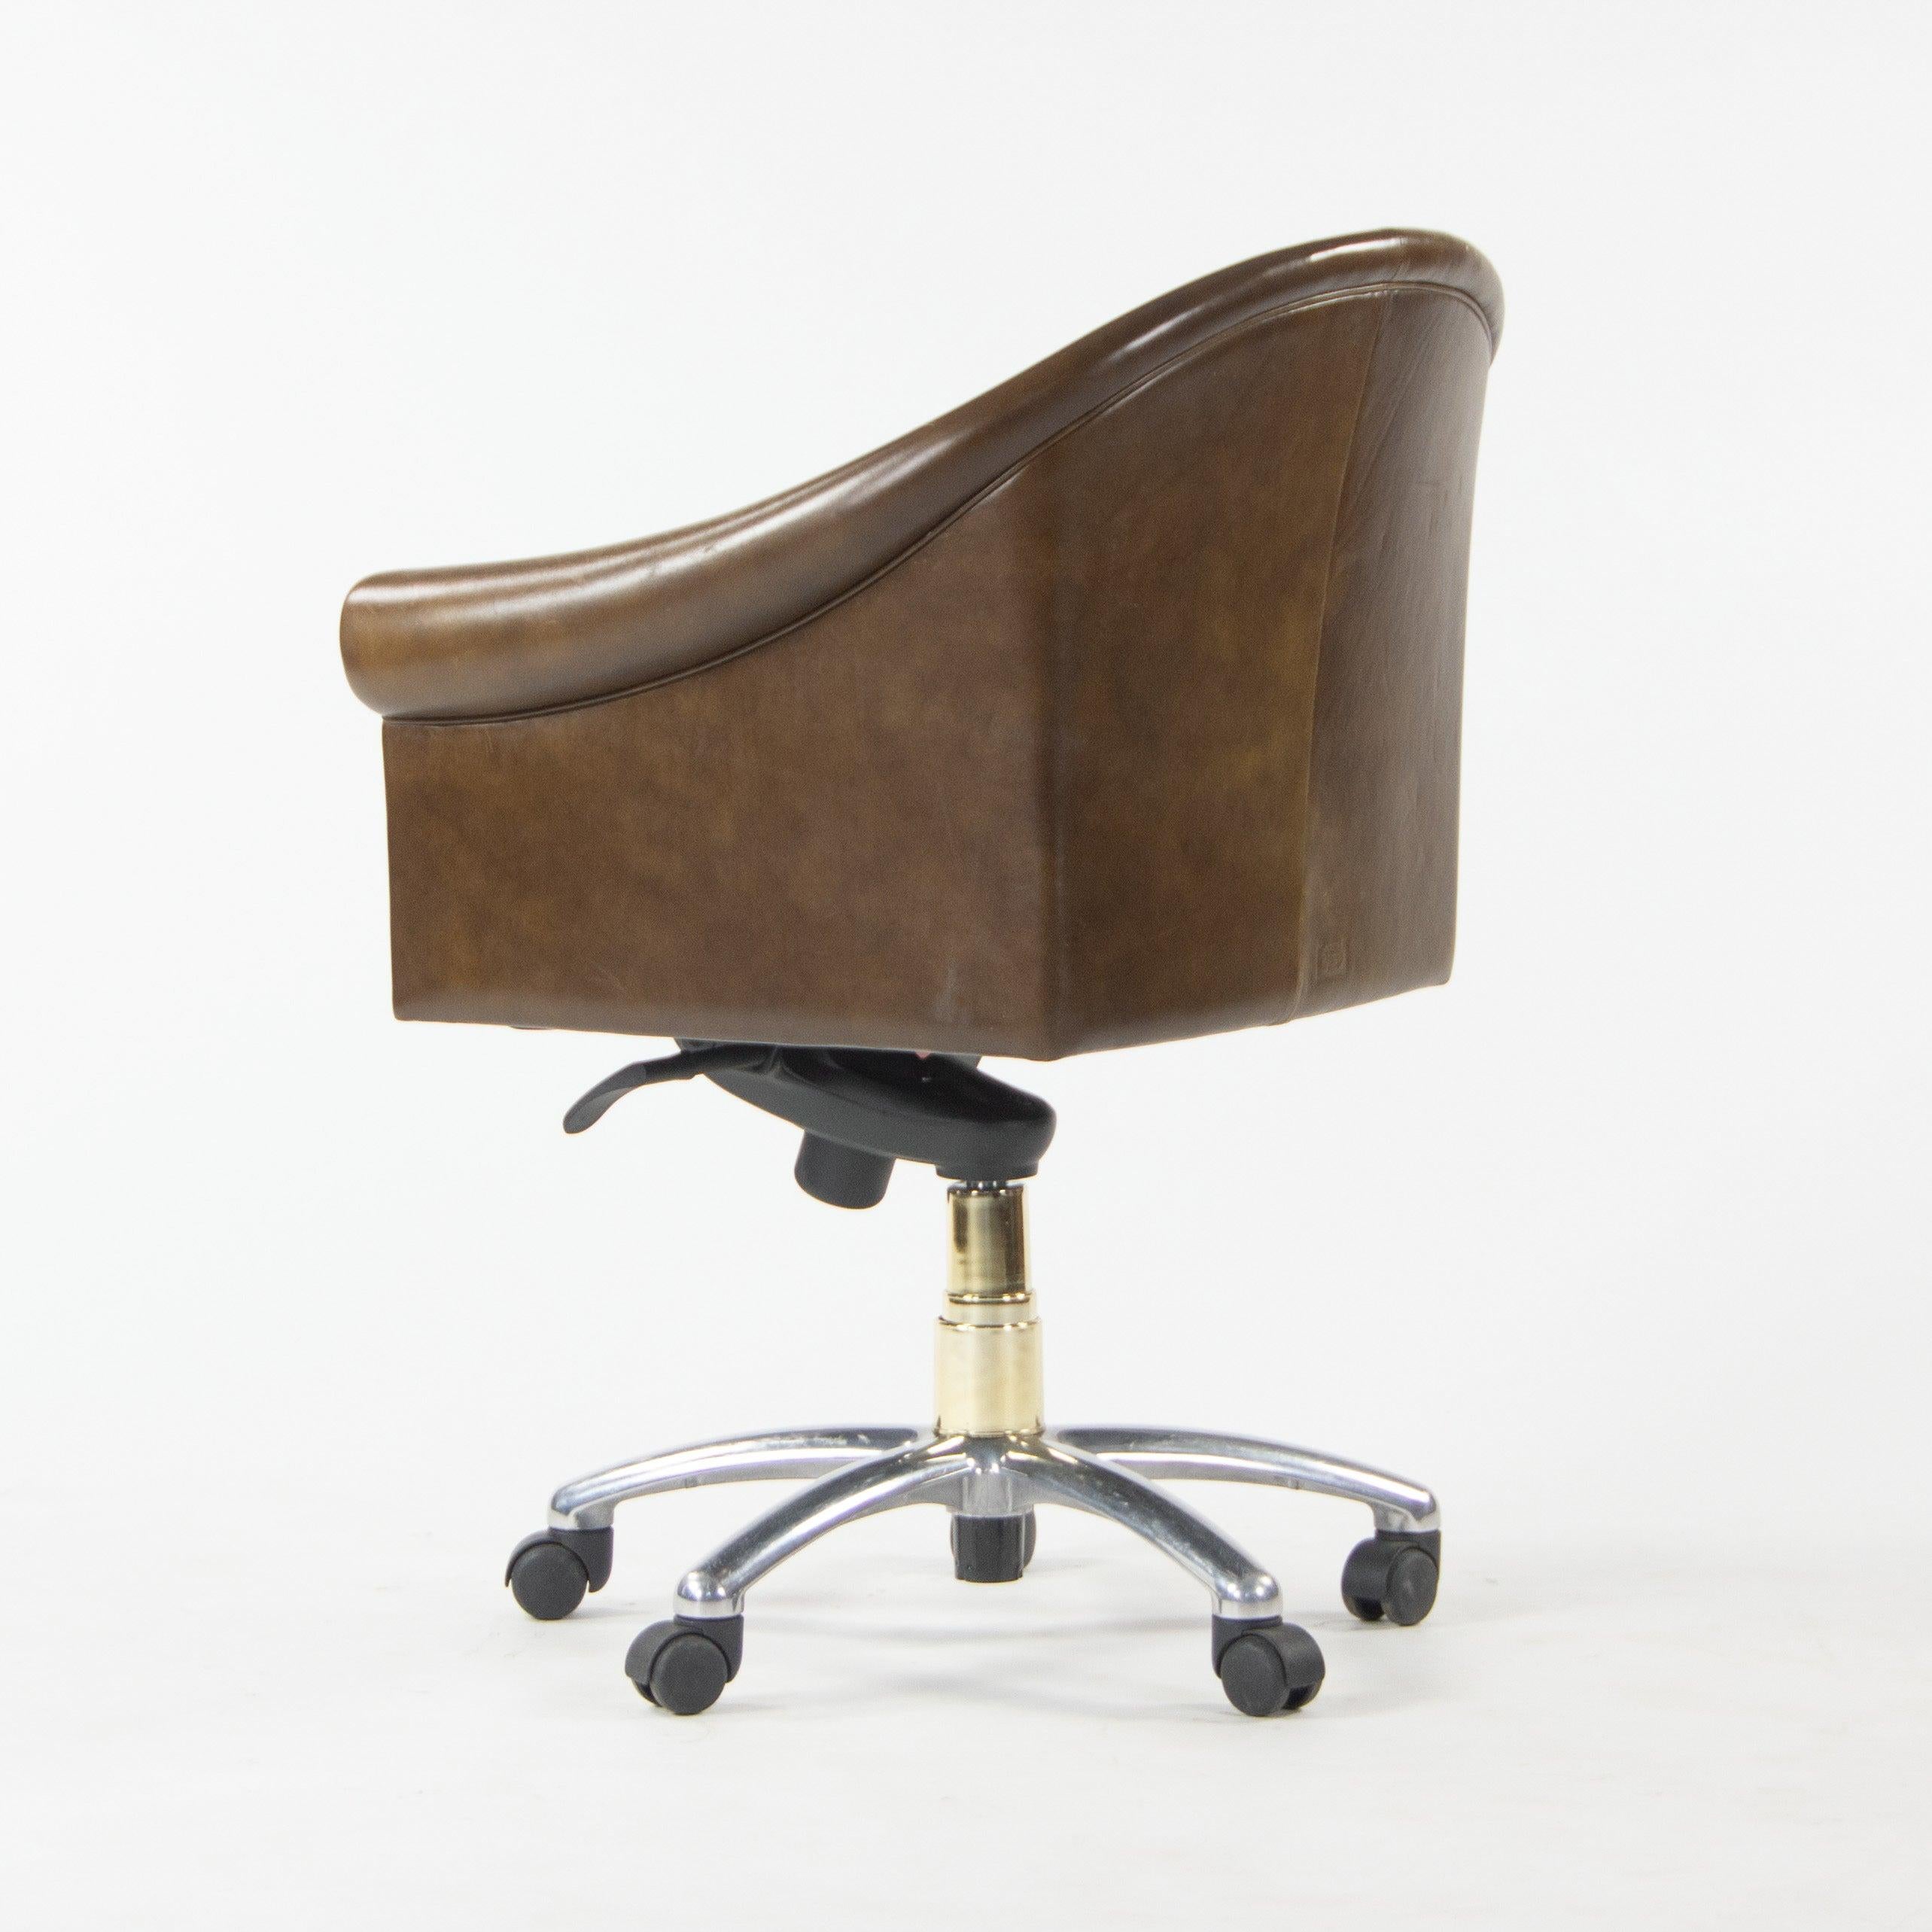 Contemporary Poltrona Frau Brown Leather Luca Scacchetti Sinan Office Desk Chair For Sale